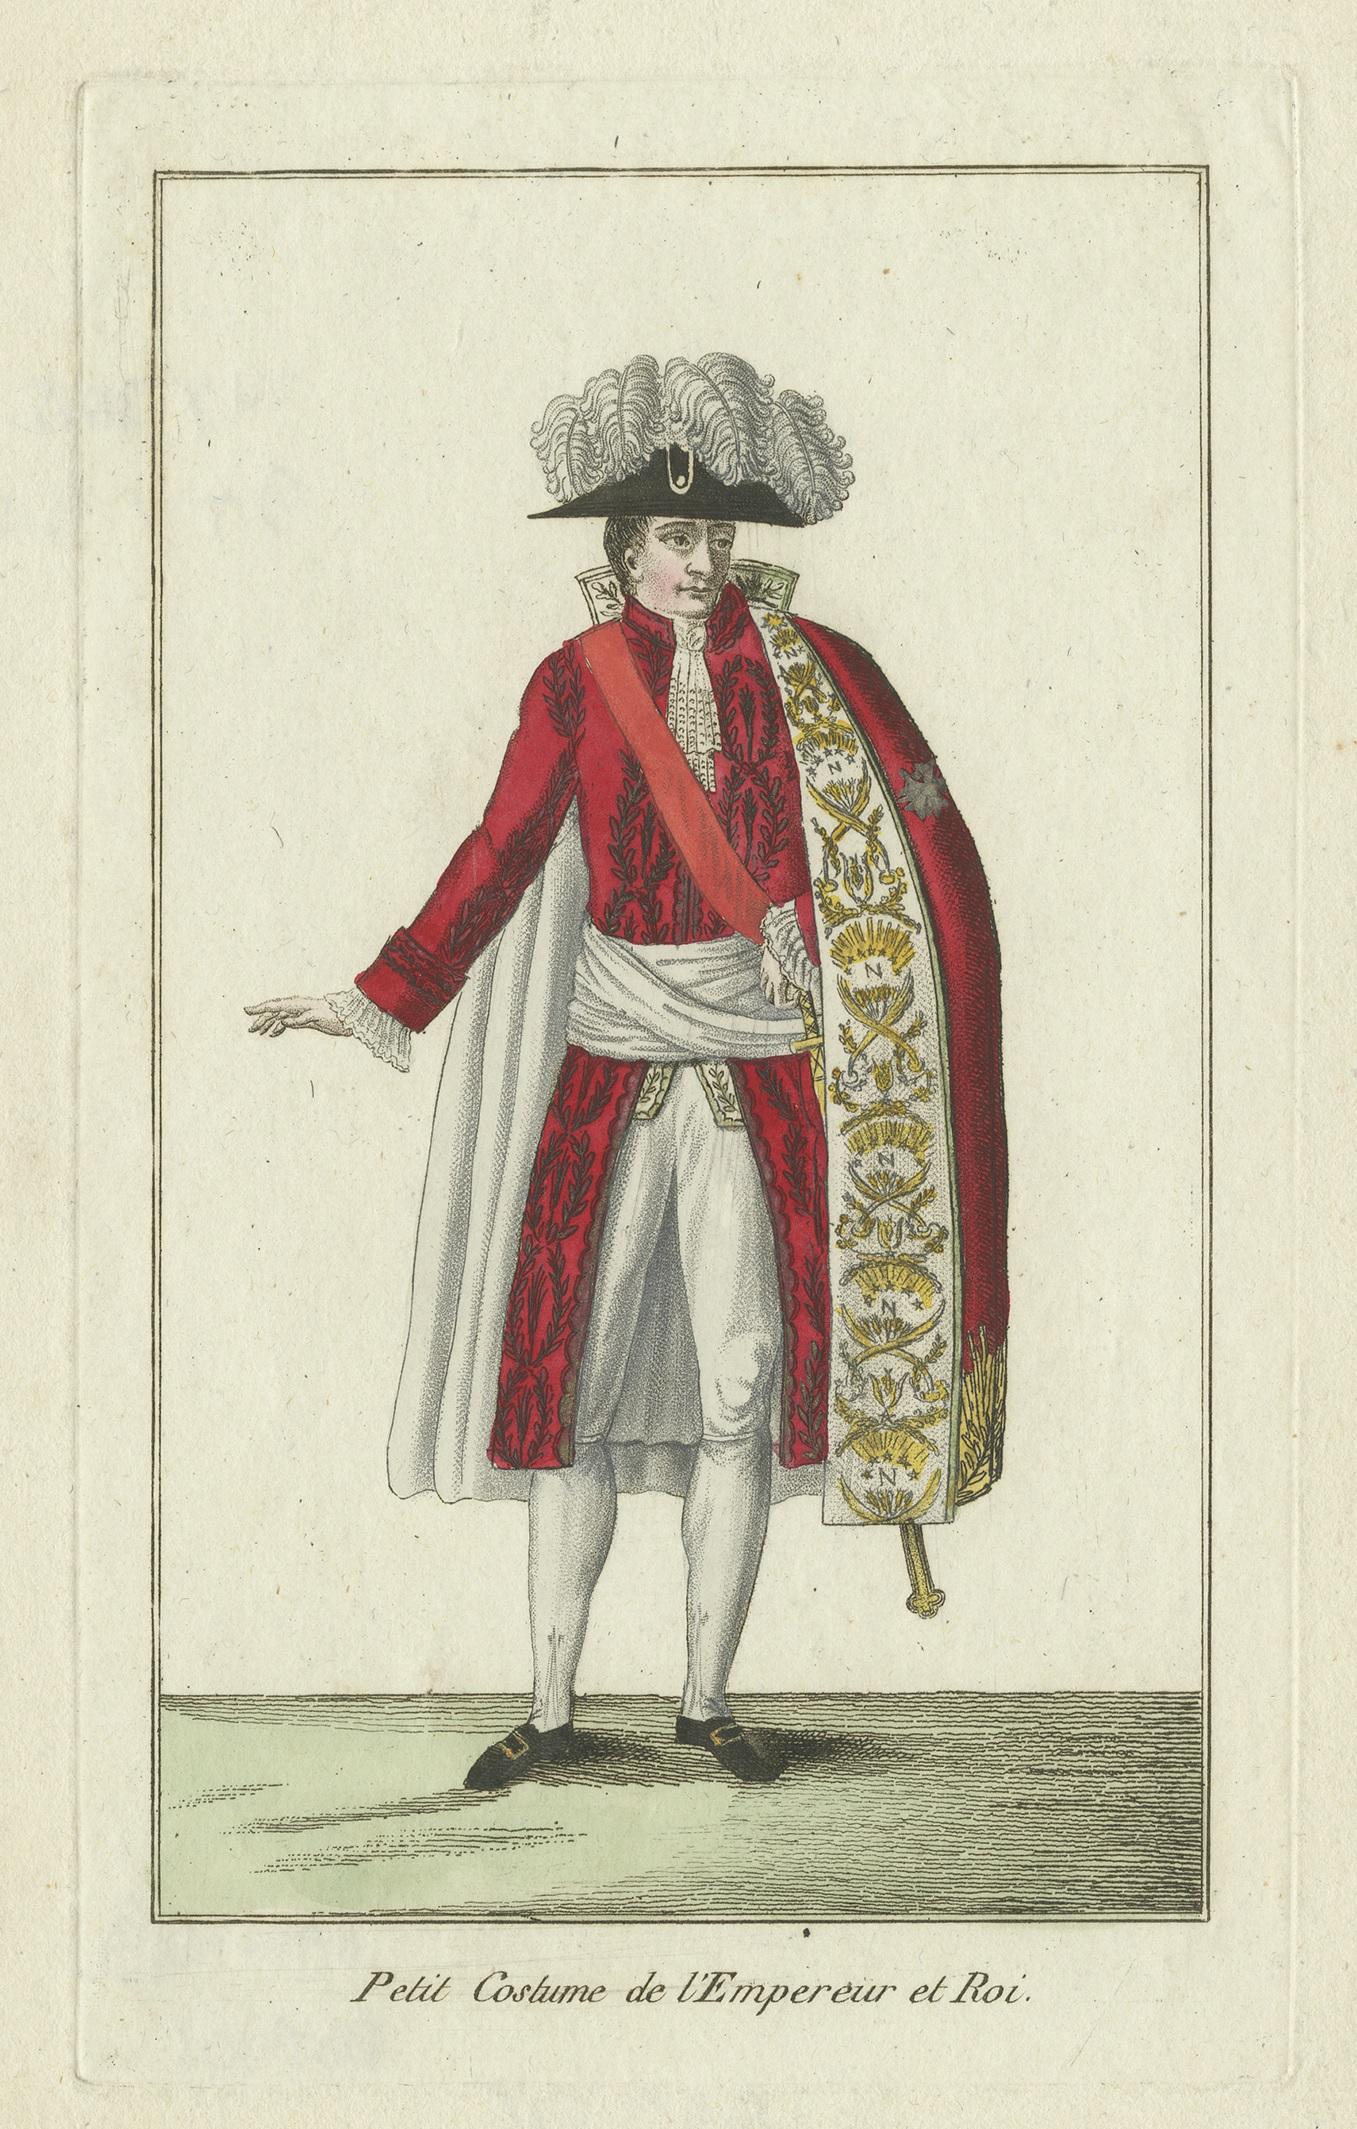 Antique print titled 'Grand Costume de l'Empereur et Roi'. Costume print of the Emperor and King of France. This print originates from a small booklet with engravings of French costumes.